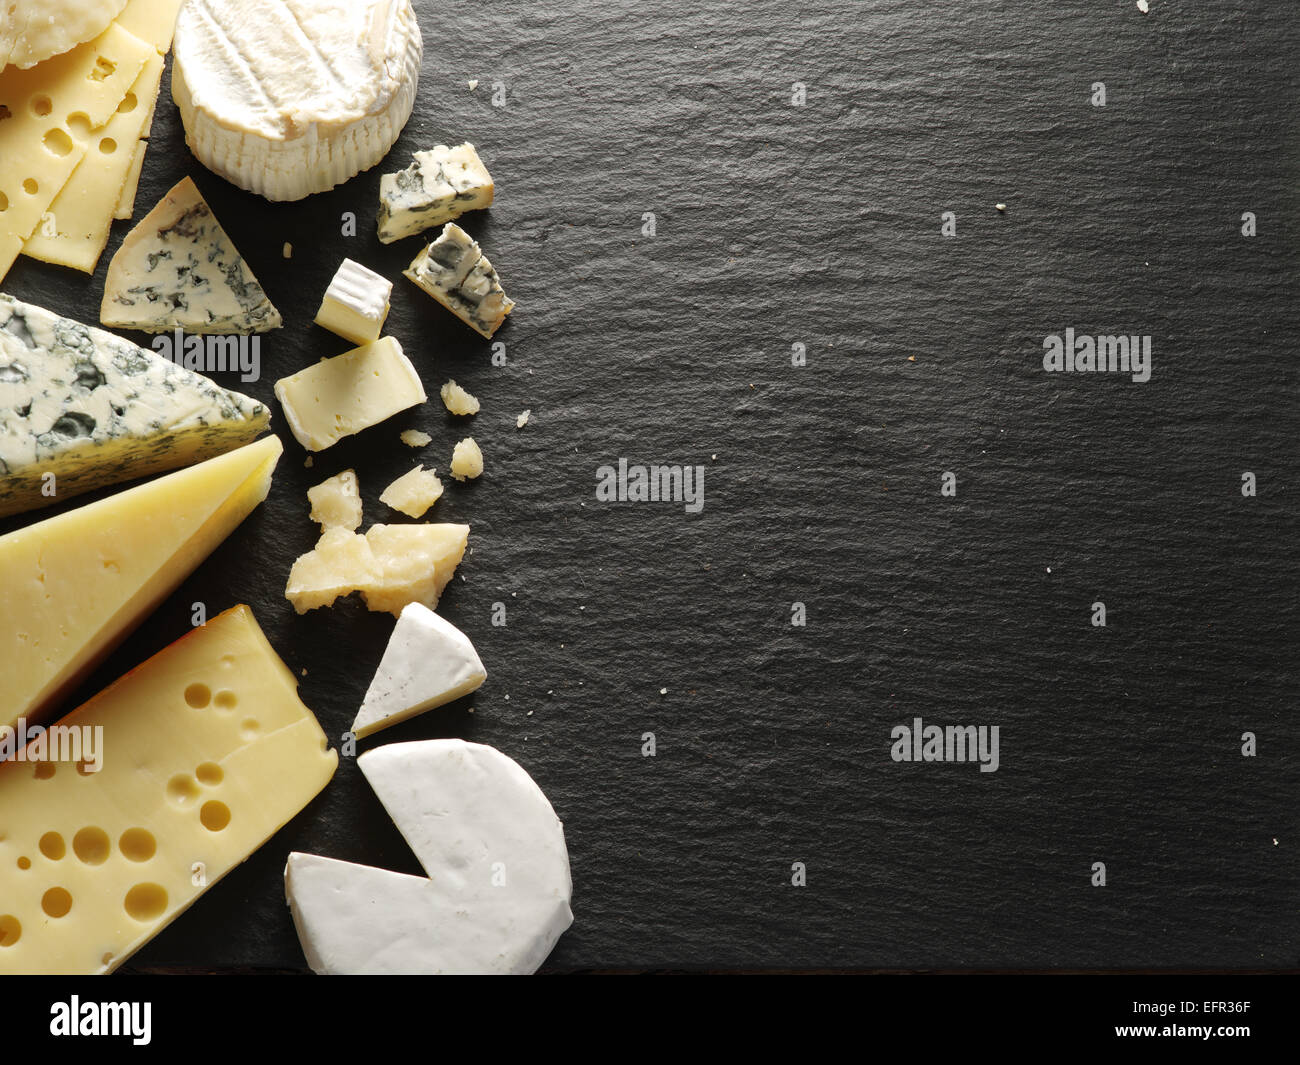 Different types of cheeses on black board. Stock Photo